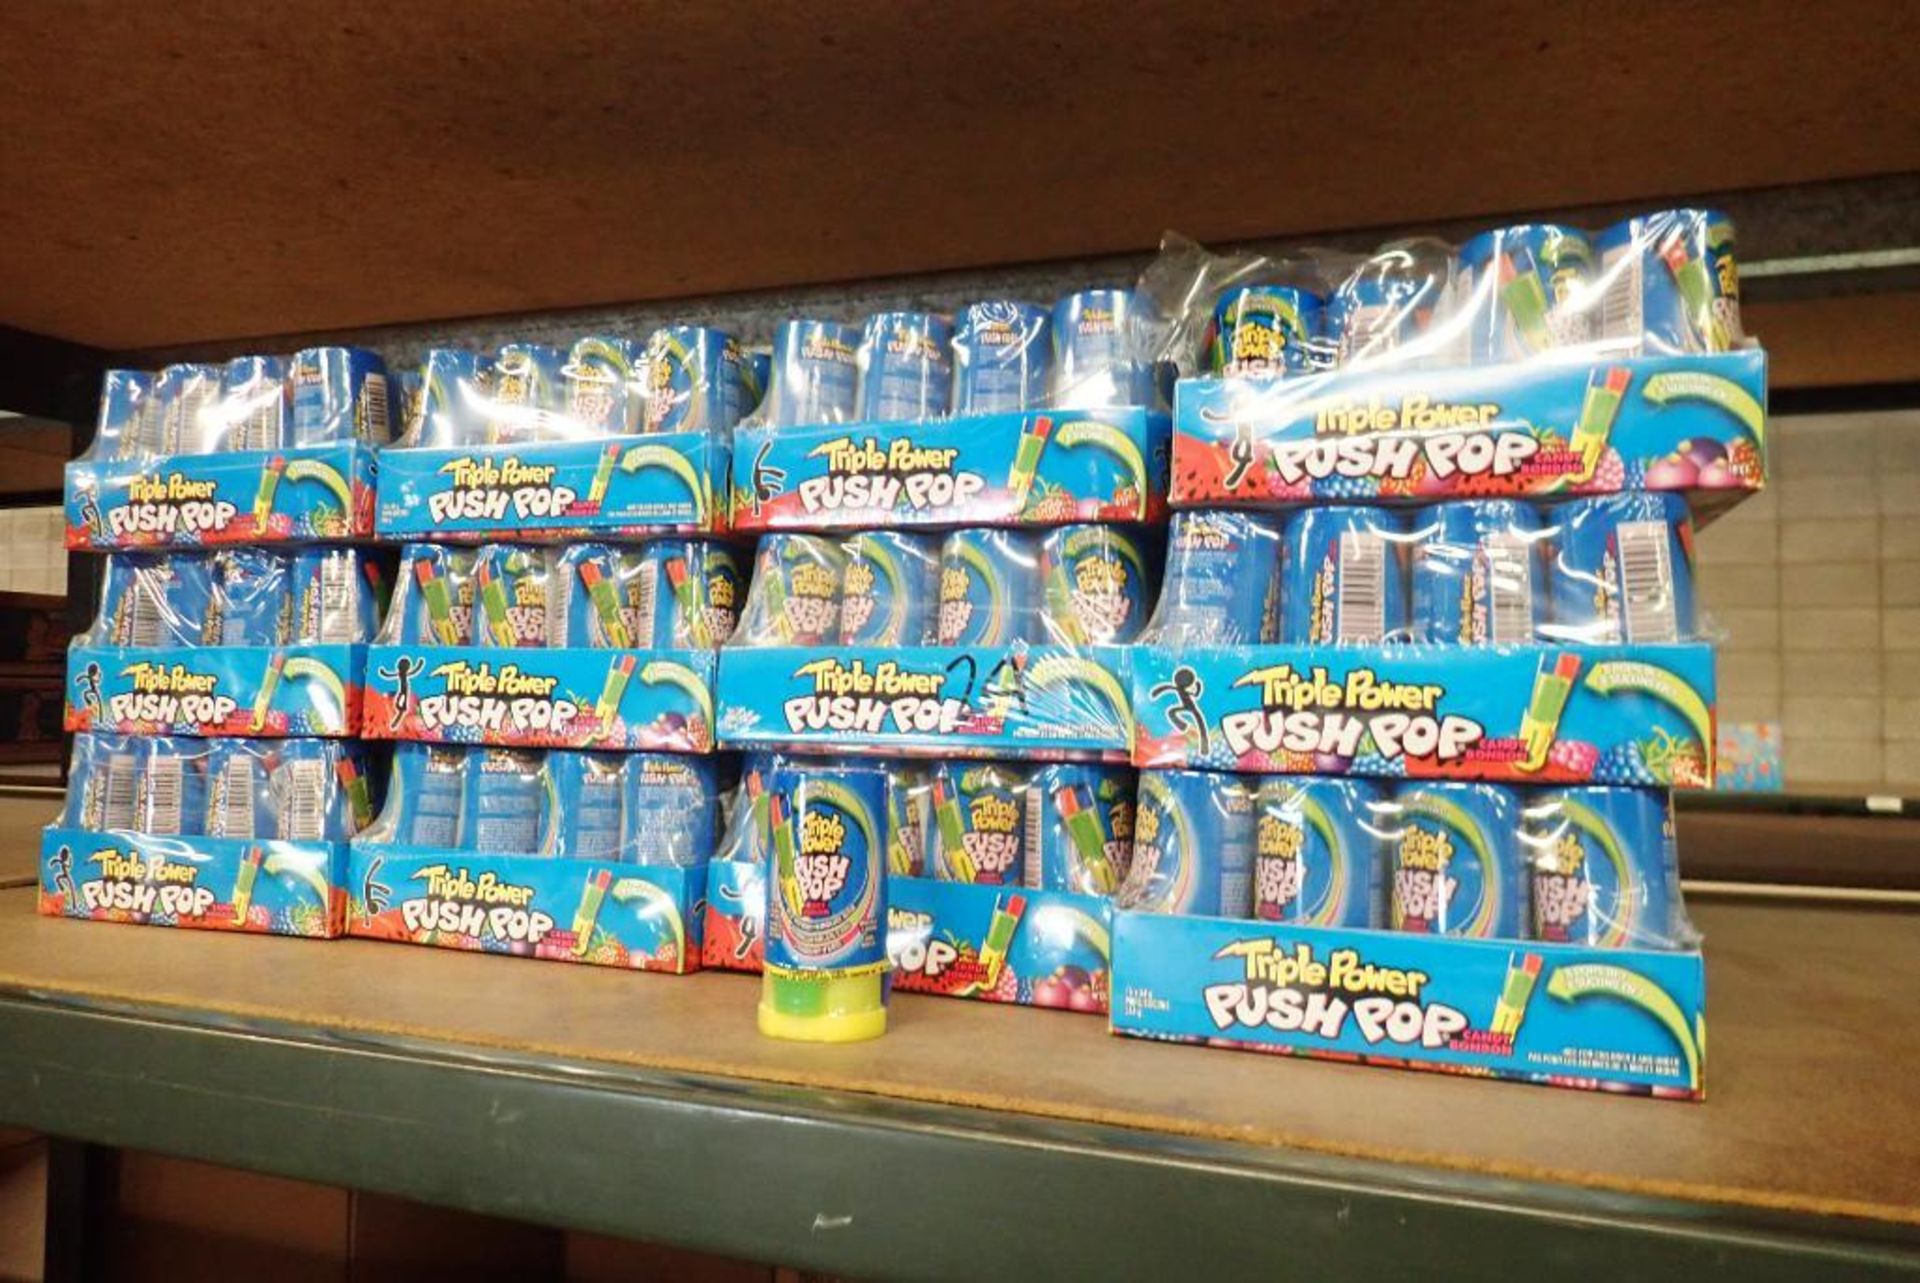 Lot of Approx. (24) Boxes Triple Power Push Pops.